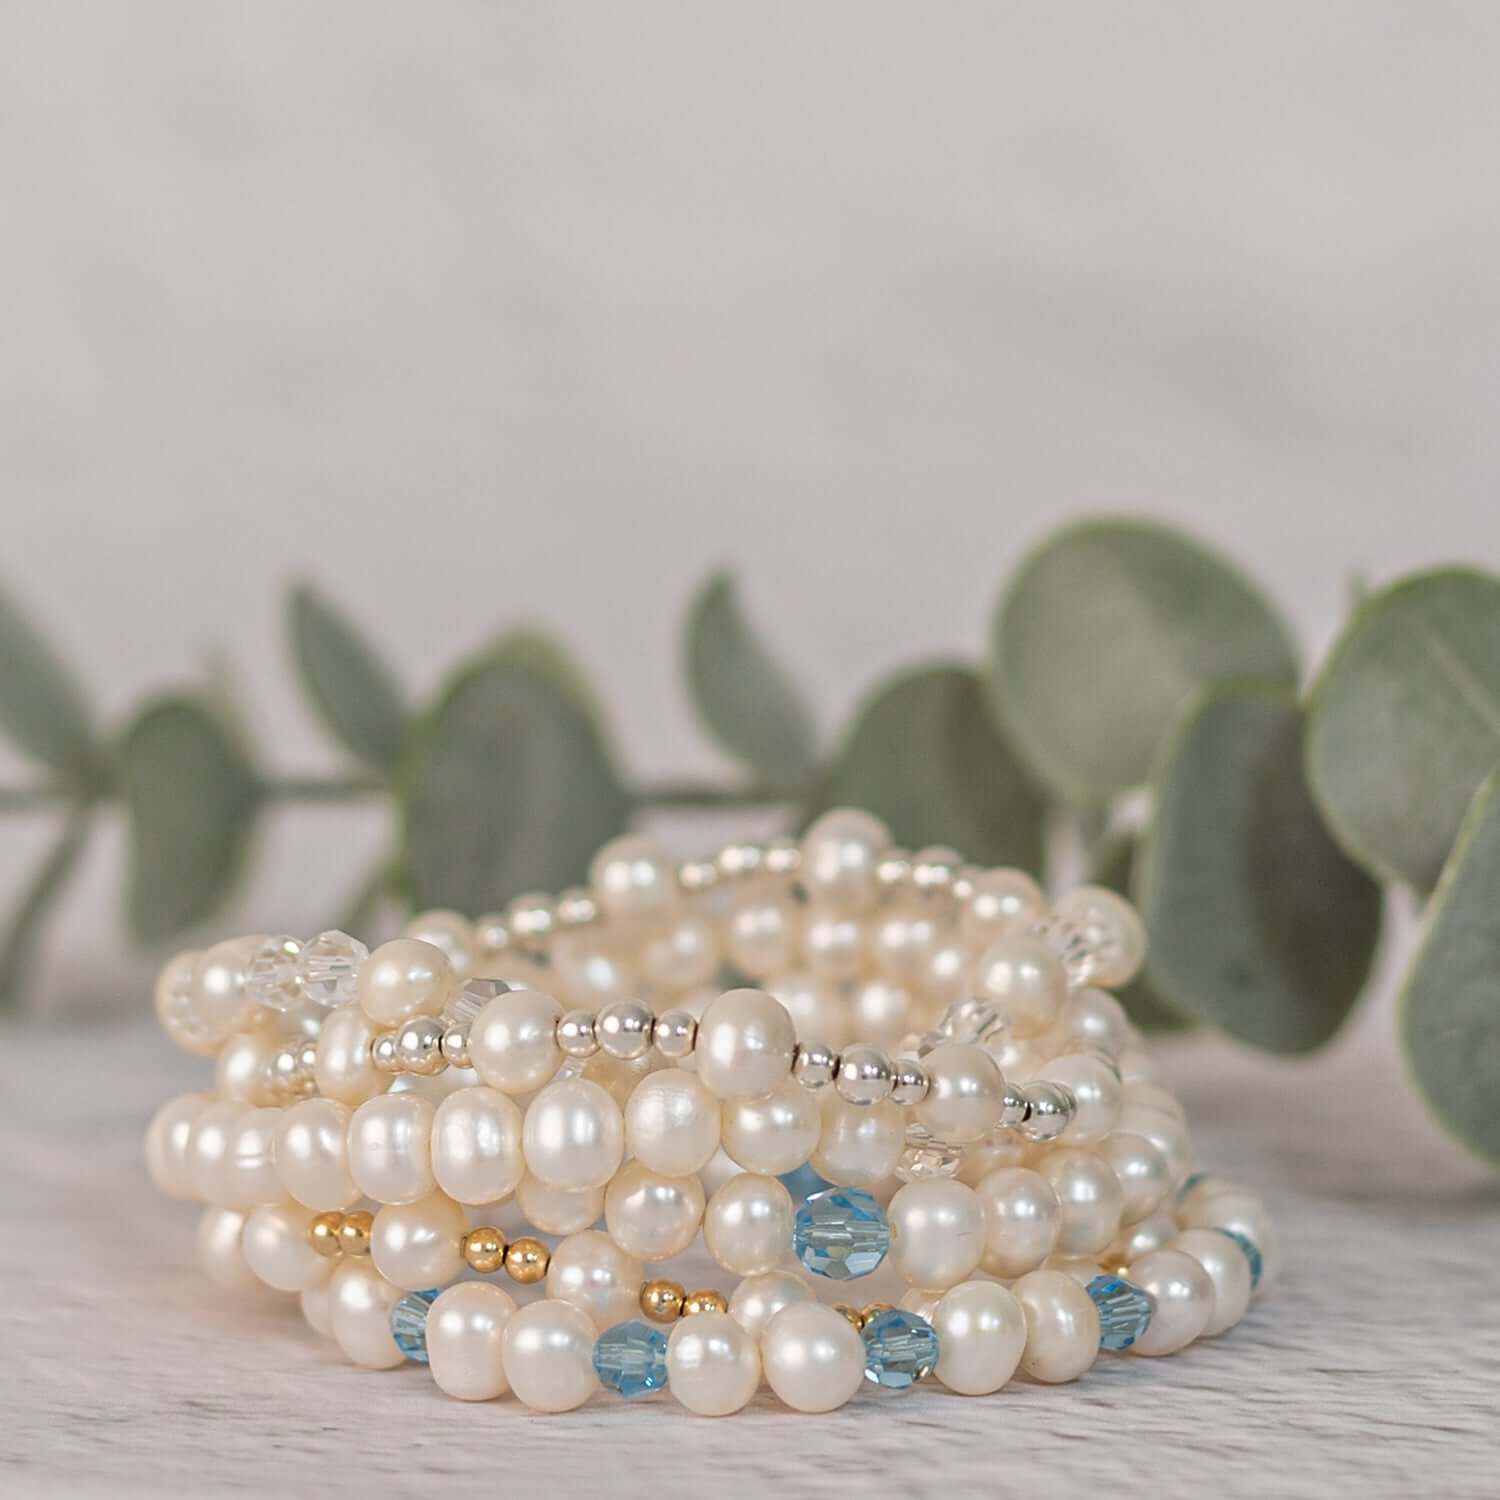 A multi-strand women's pearl bracelet made of white pearls, gold and silver beads, and blue crystals is coiled in a circular shape. The bracelet is set against a soft-focus background of green eucalyptus leaves on a light-colored surface